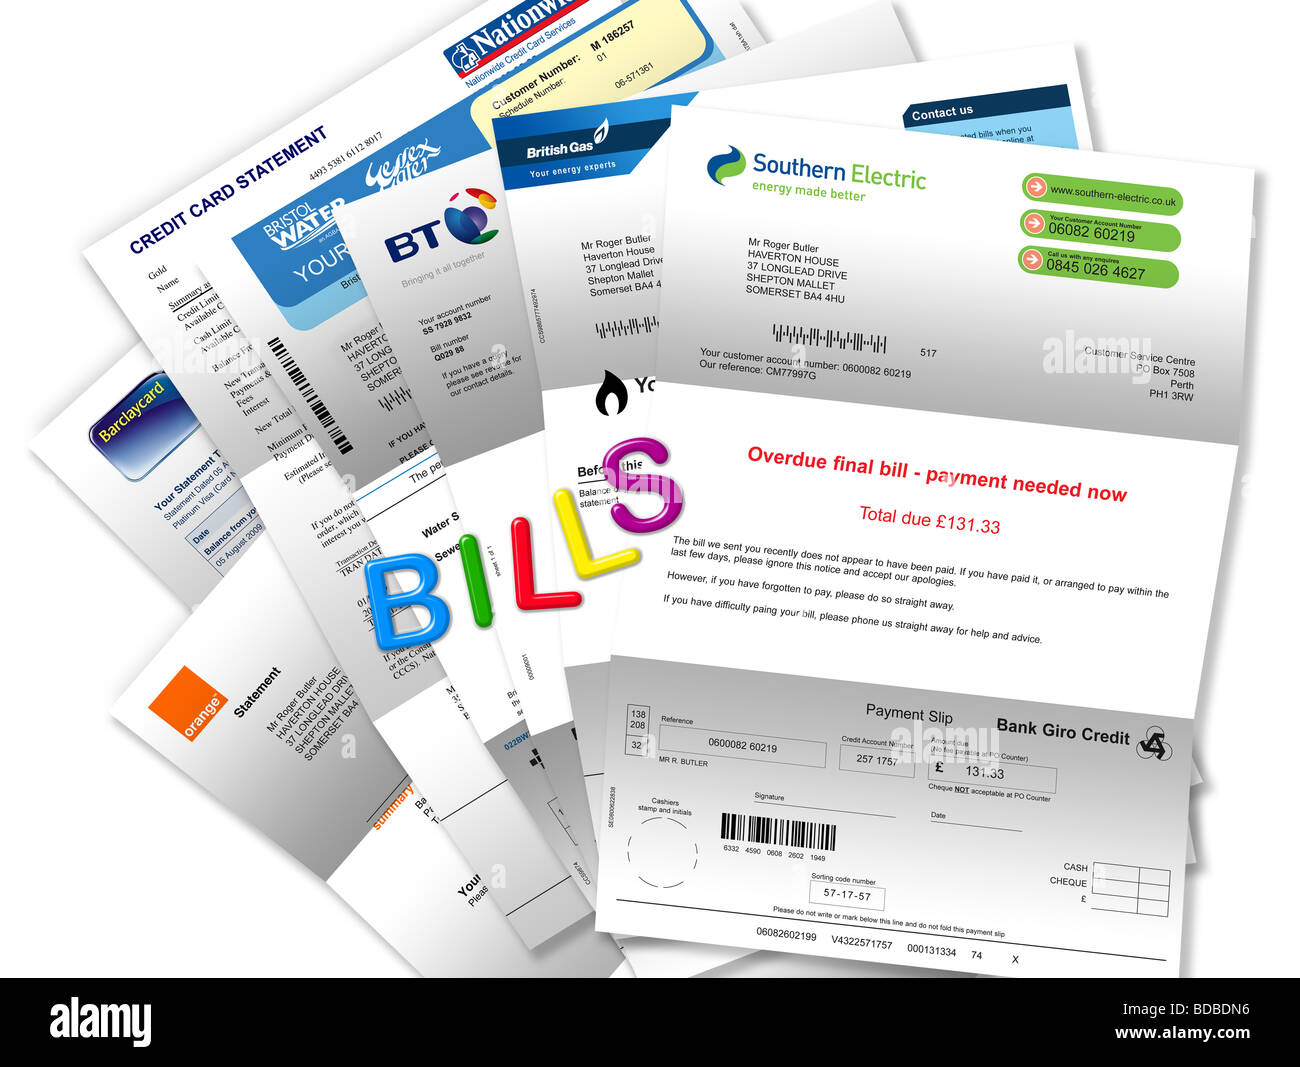 Bills (gas, electricity, telephone, mobile, water and credit cards) attached to fridge door by magnetic letters spelling ‘BILLS' Stock Photo